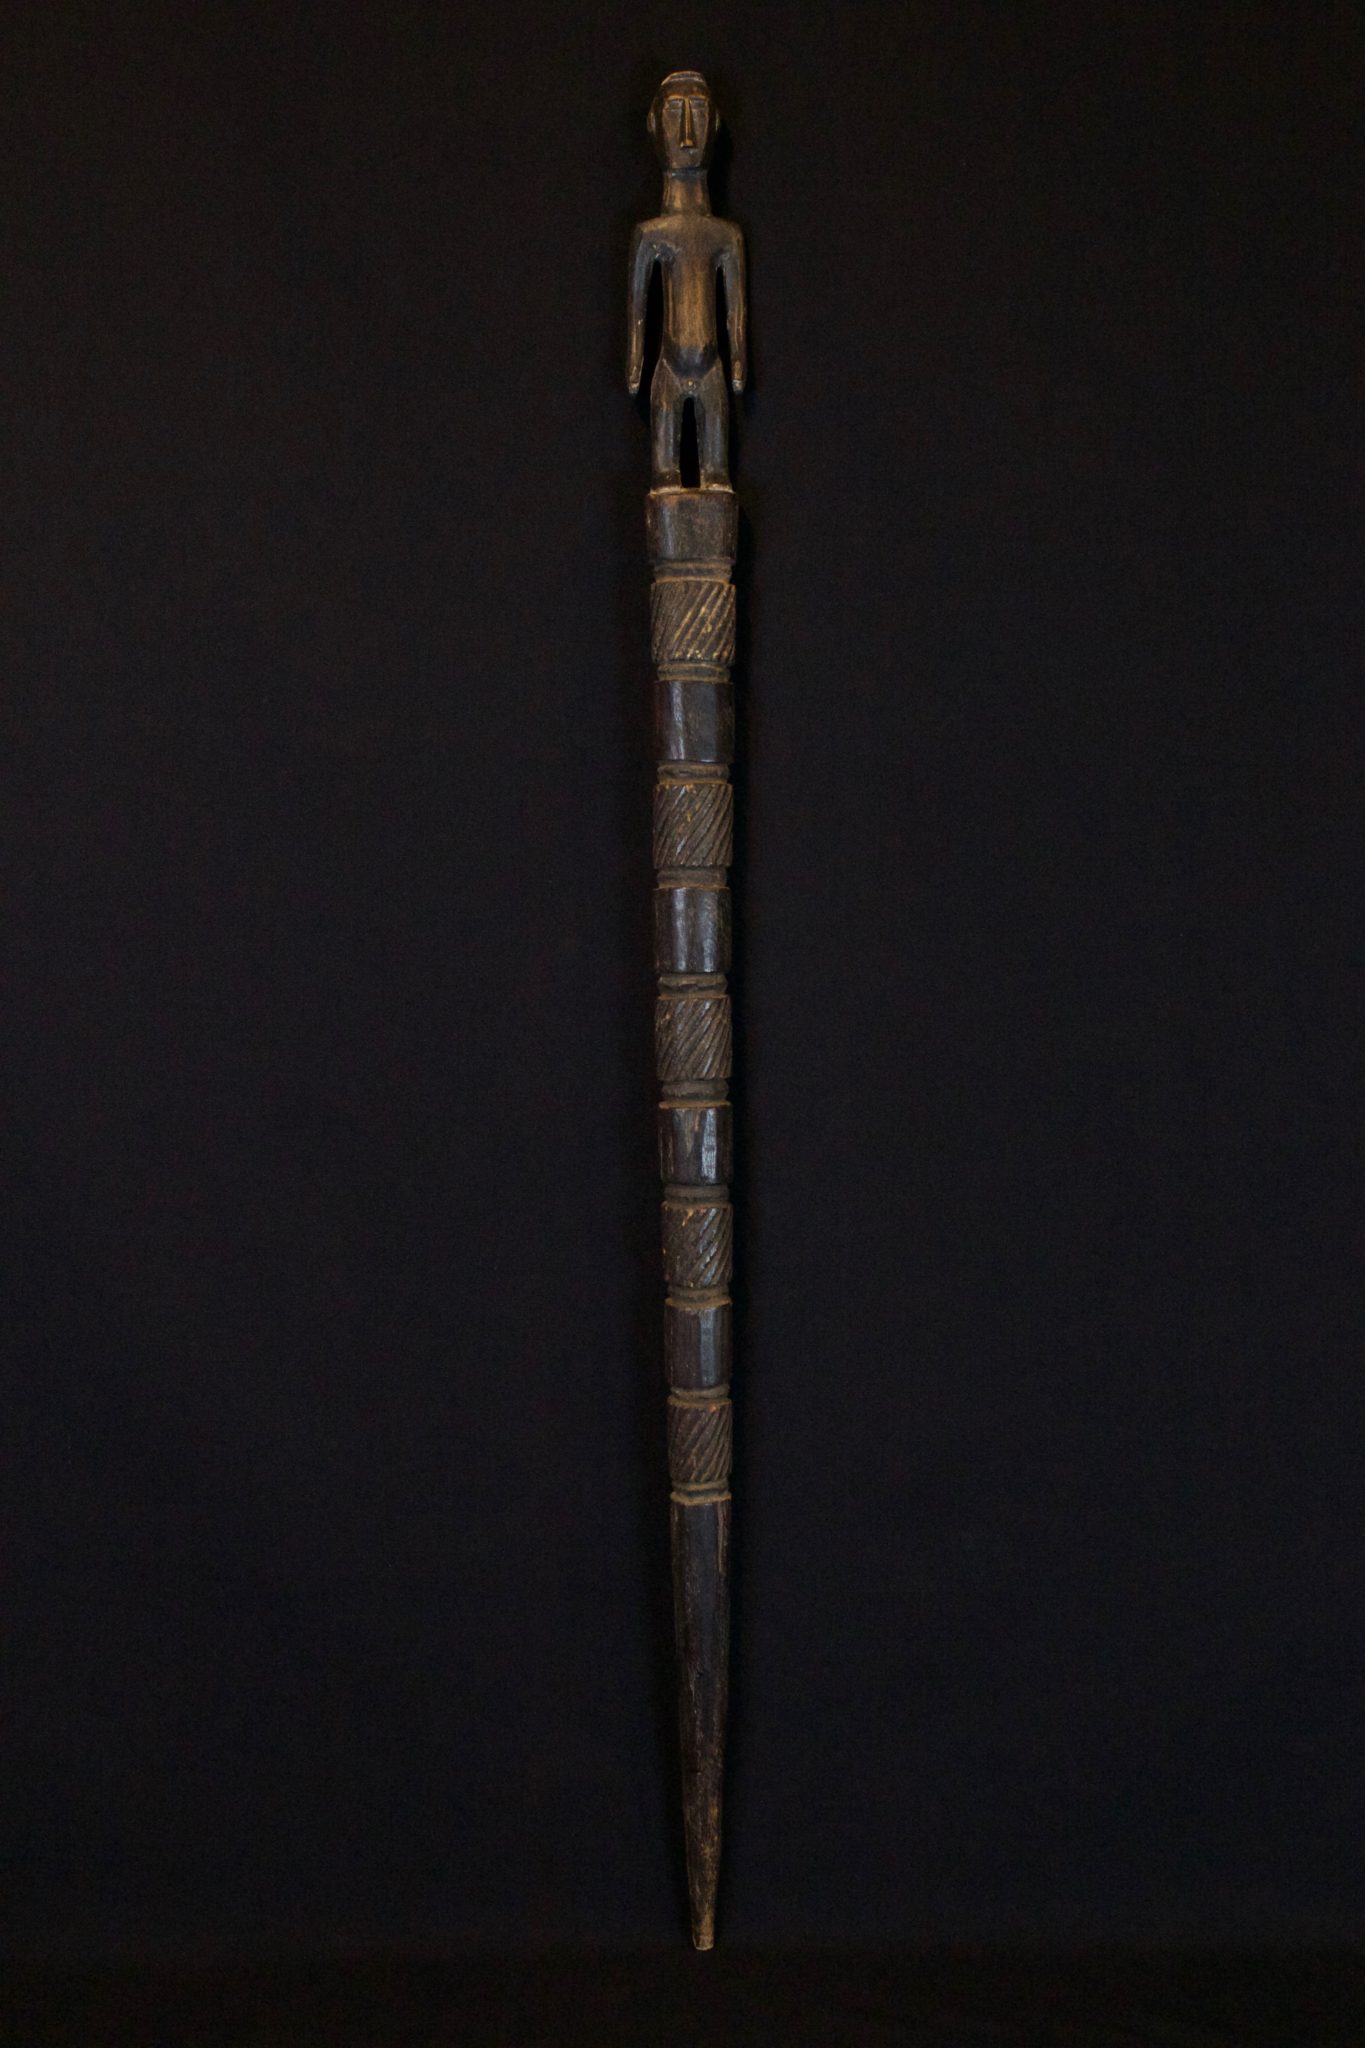 Shaman Staff, Sumba, Island, Lesser Sunda Islands, Indonesia, Mid 20th c, Wood, patinated with use and age. Used in healing rituals. 35 ½ x 2 ¼” x 1 ½”, $700.